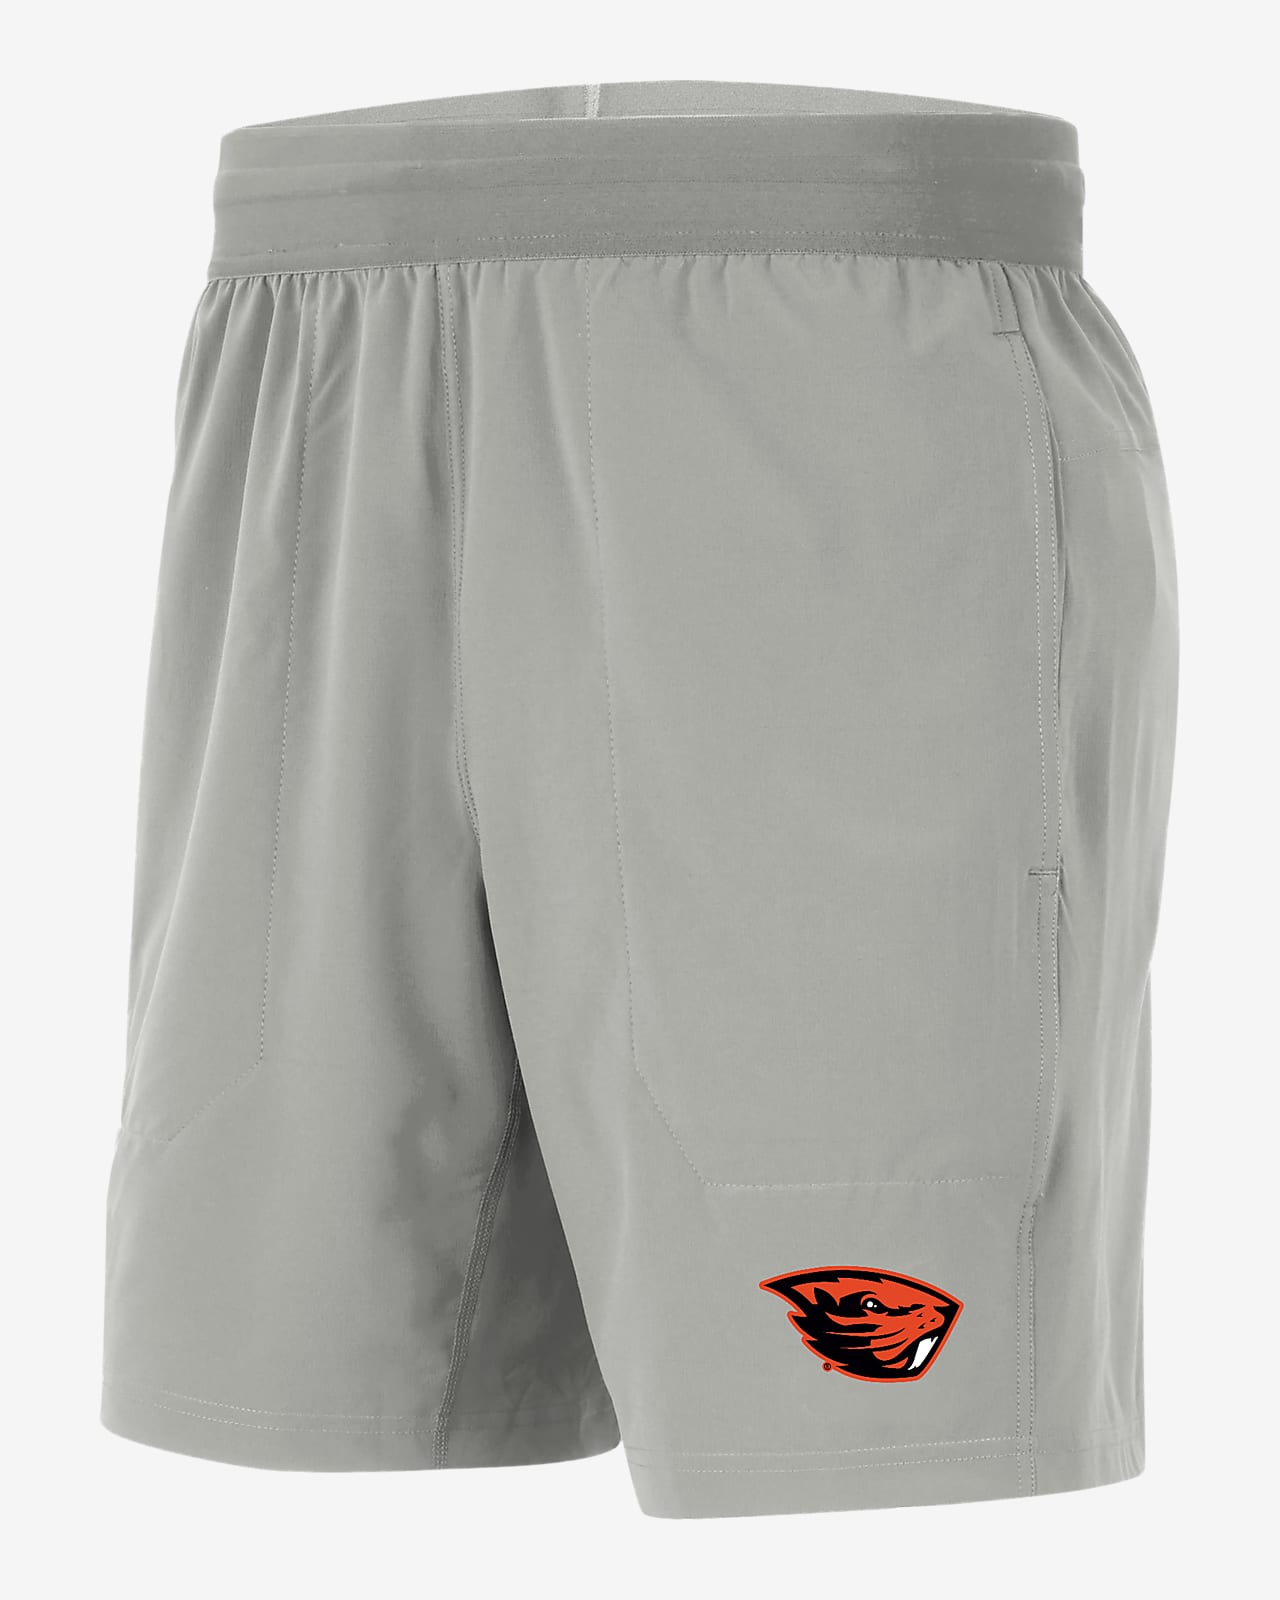 Oregon State Player Men's Nike College Shorts